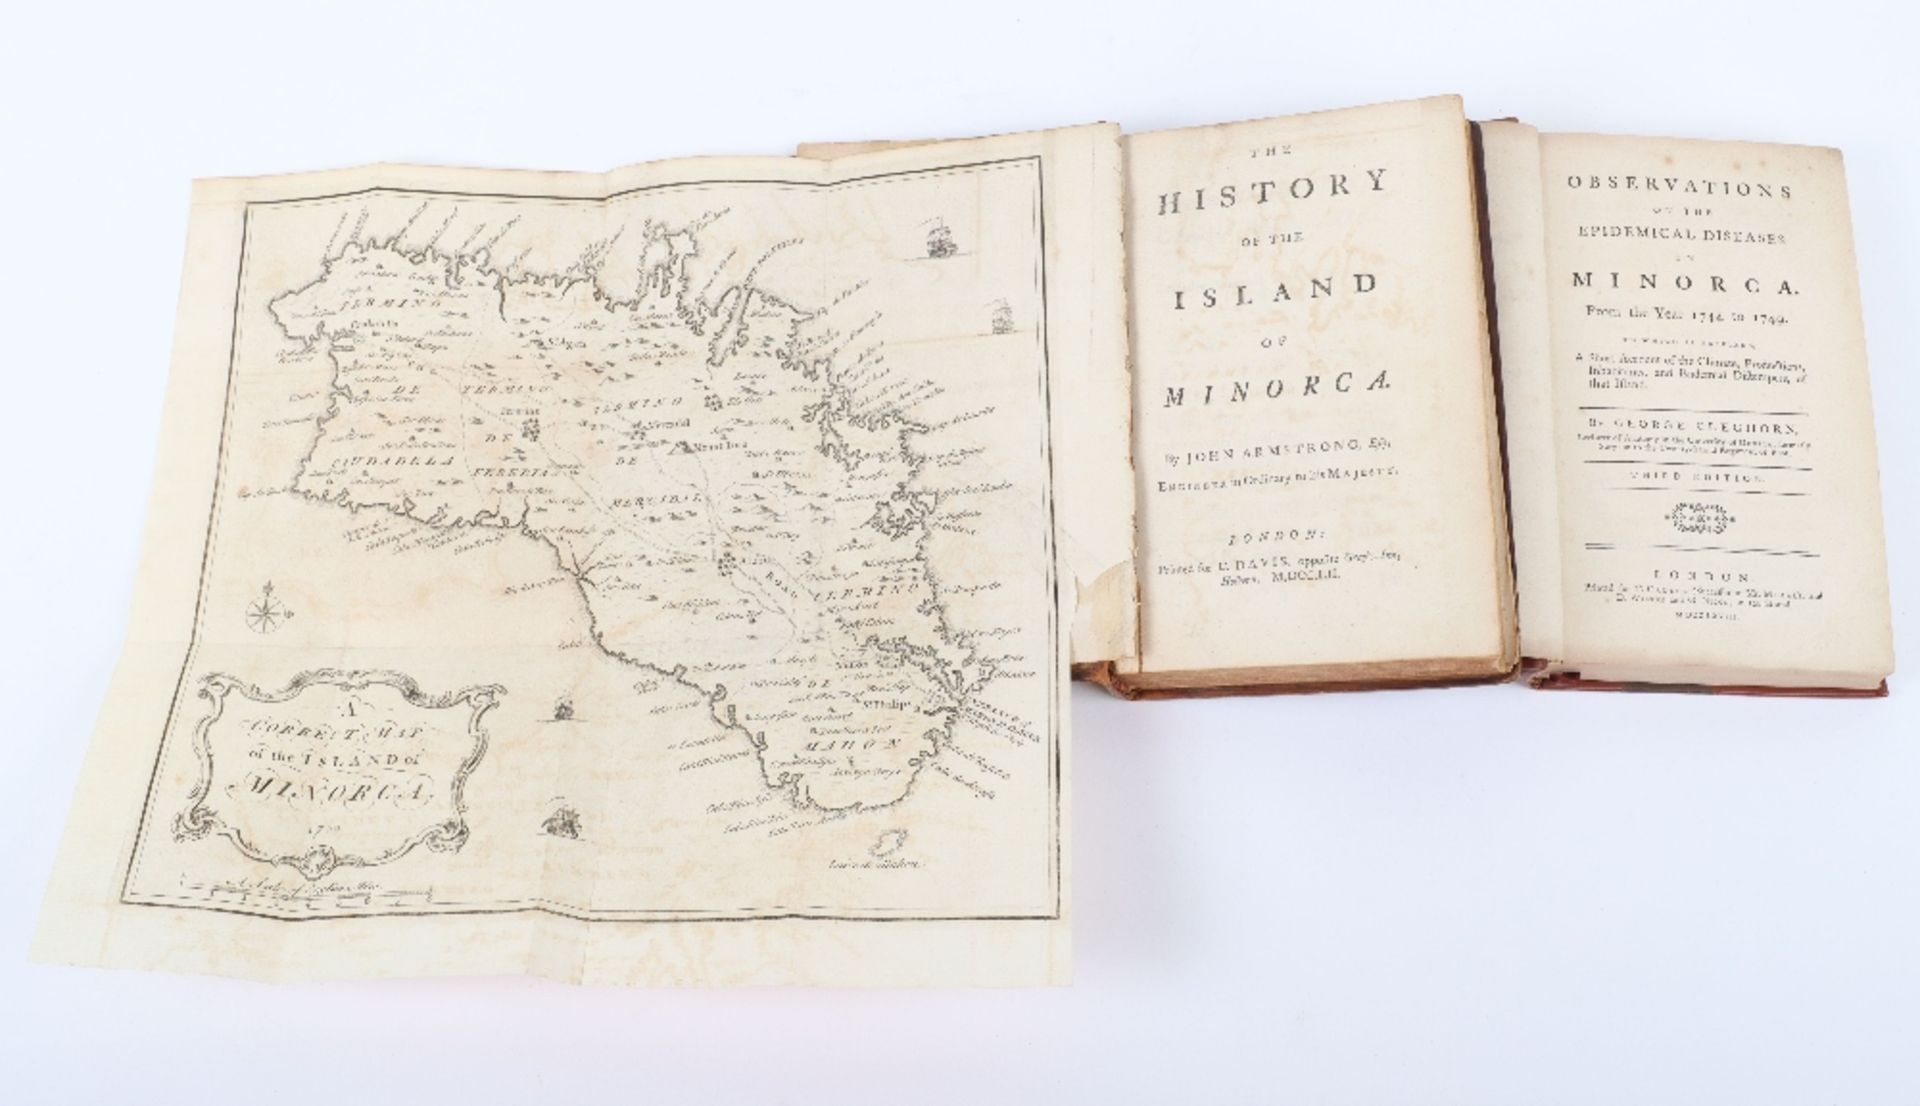 Collection of Early and Interesting Books on the History of Minorca - Image 8 of 9